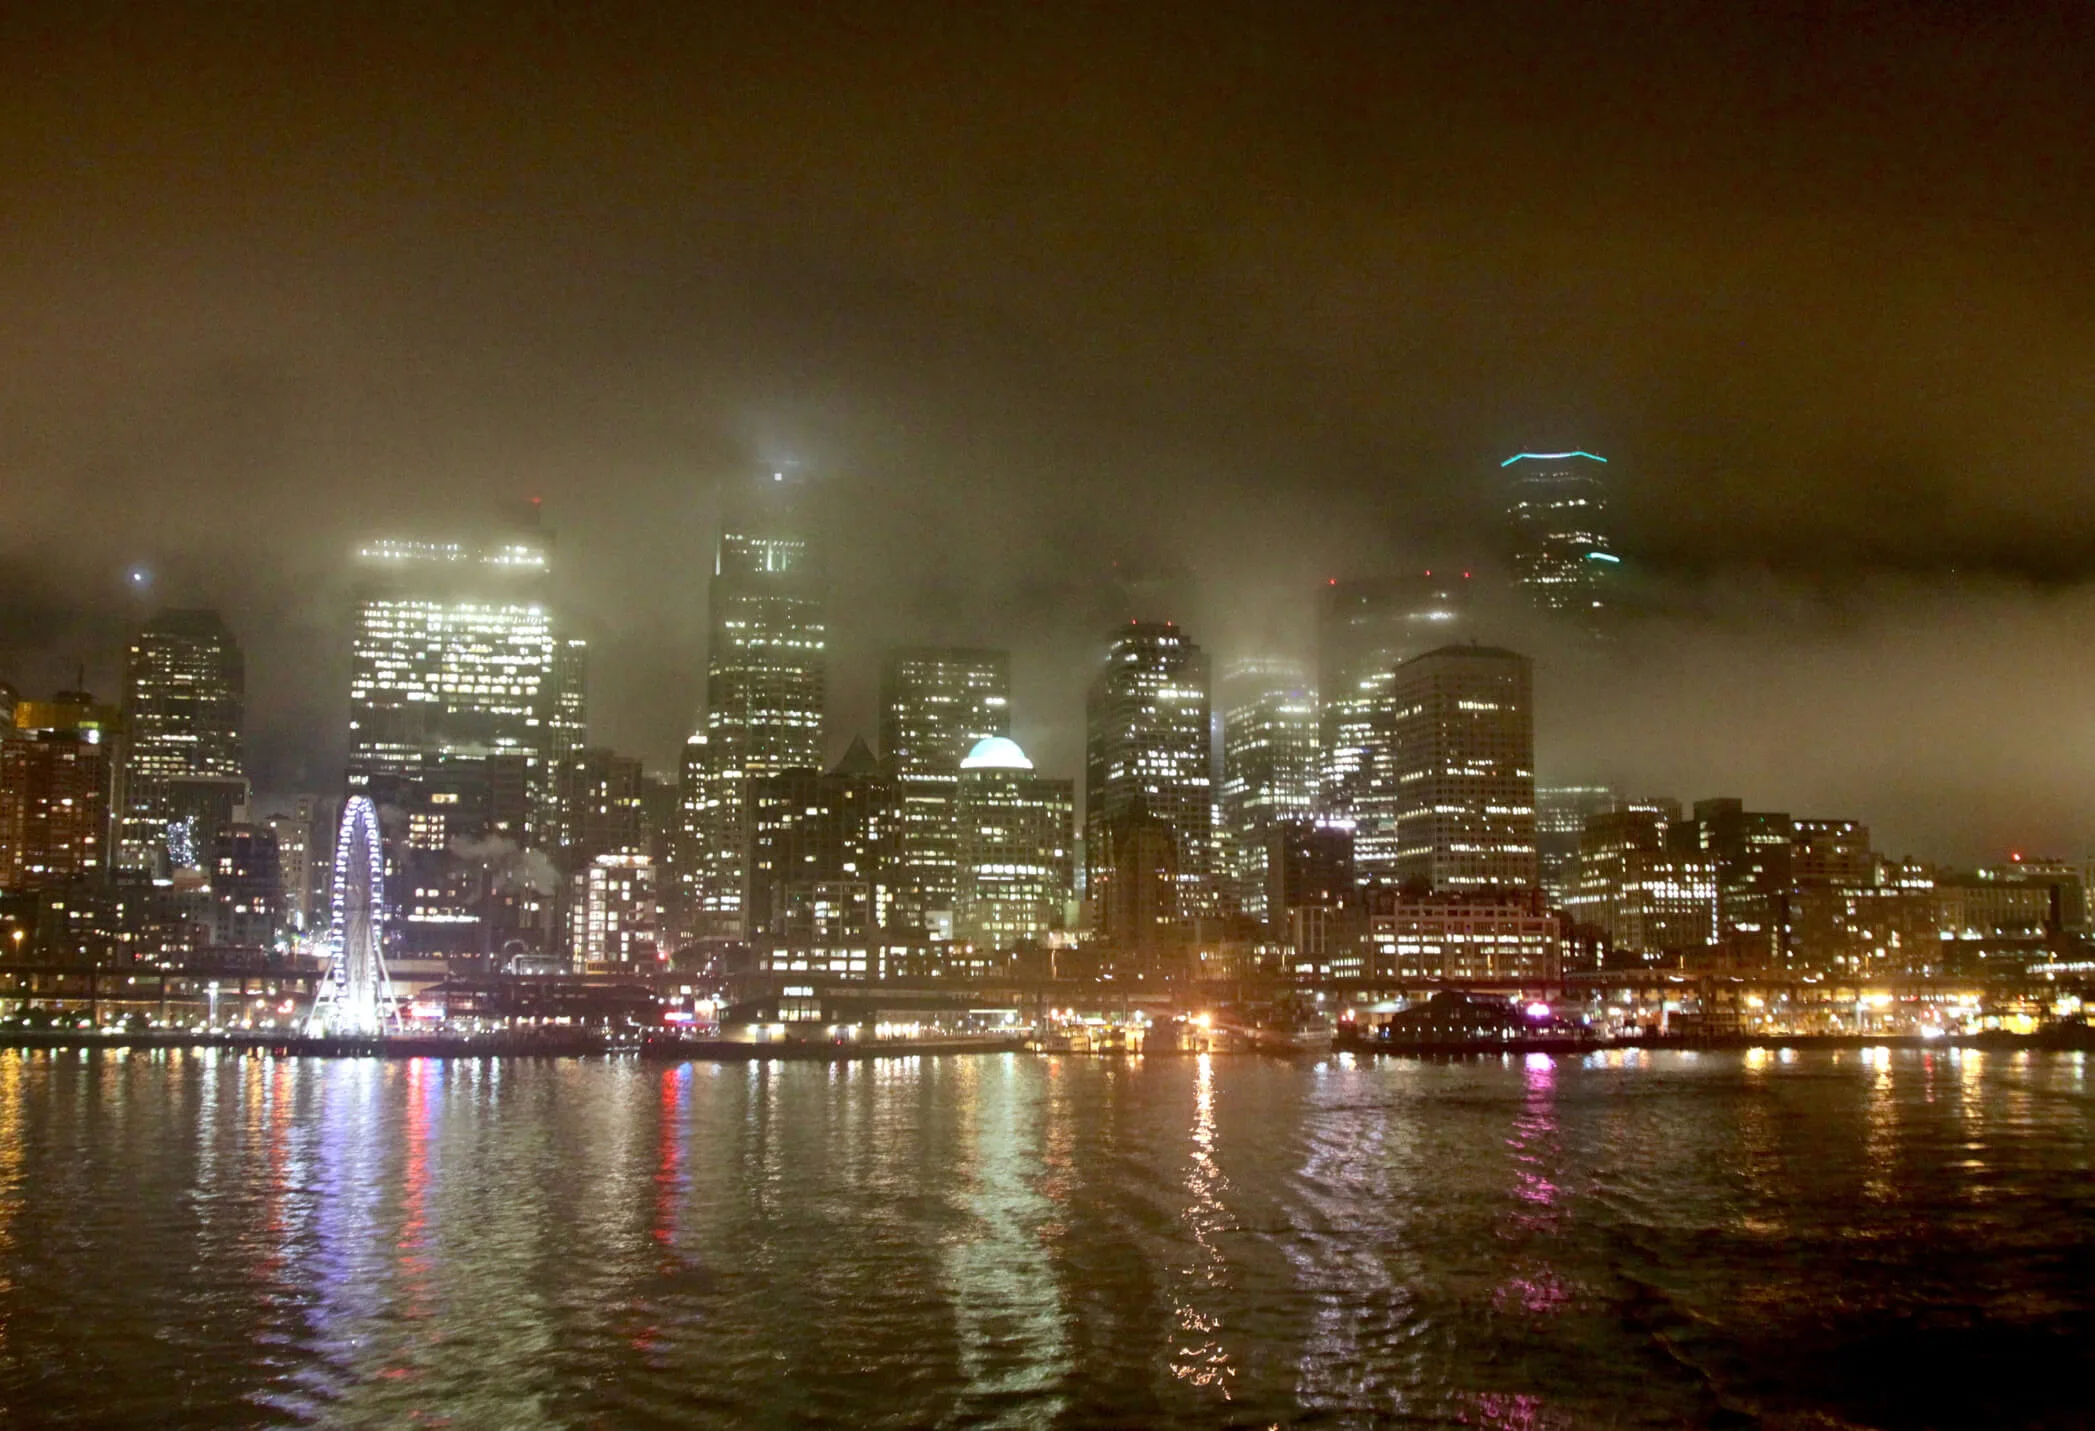 A nighttime shot of the Seattle waterfront in the low lying fog